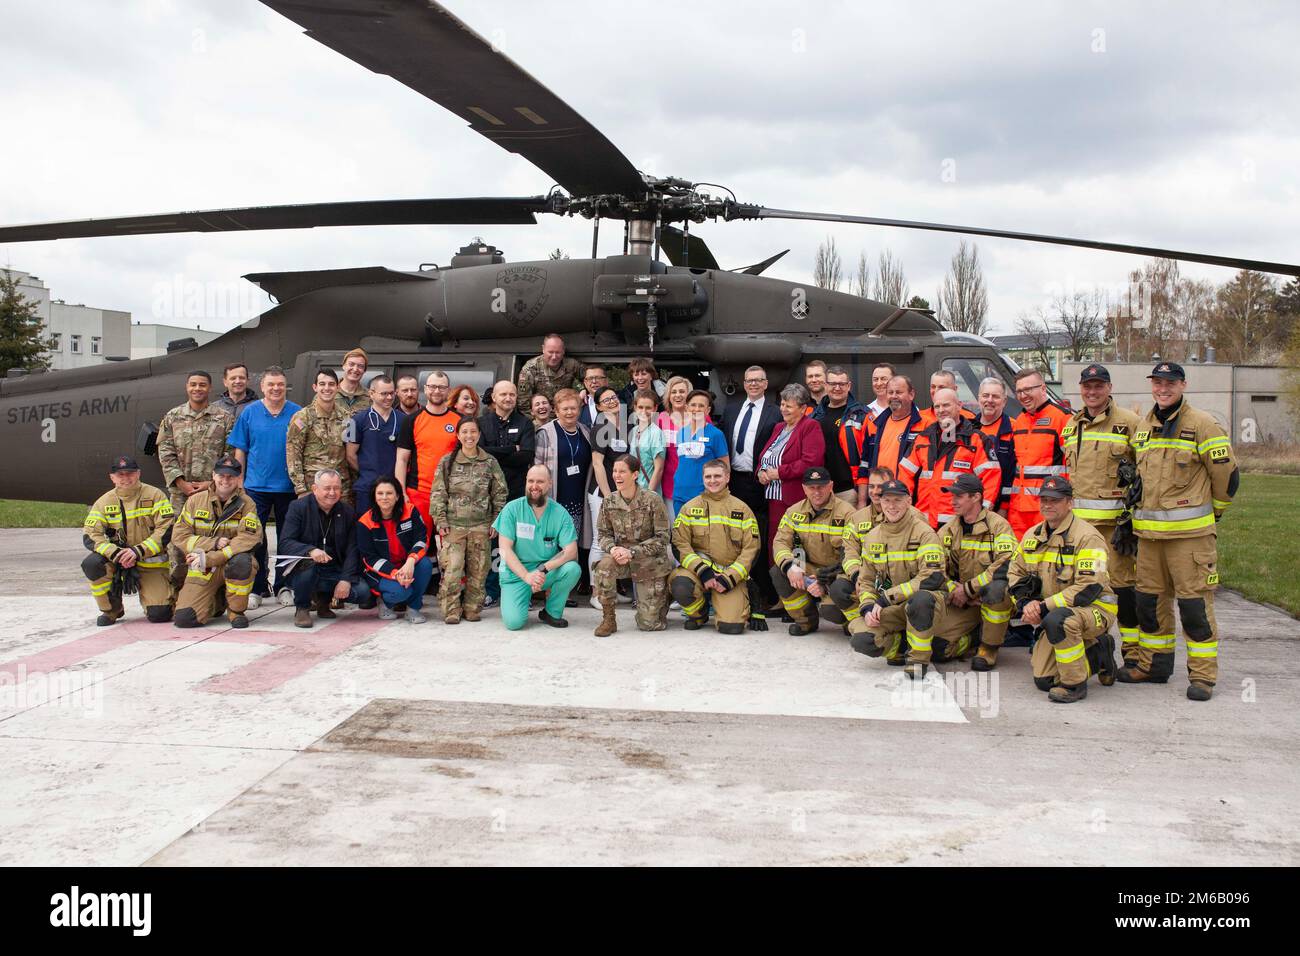 Group photo of polish medical staff and firefighters from Konin, TriCare reps posing  together in front of a H-60 Black Hawk helicopter with U.S Army soldiers, medics and pilots stationed at Powidz Air Base. Stock Photo